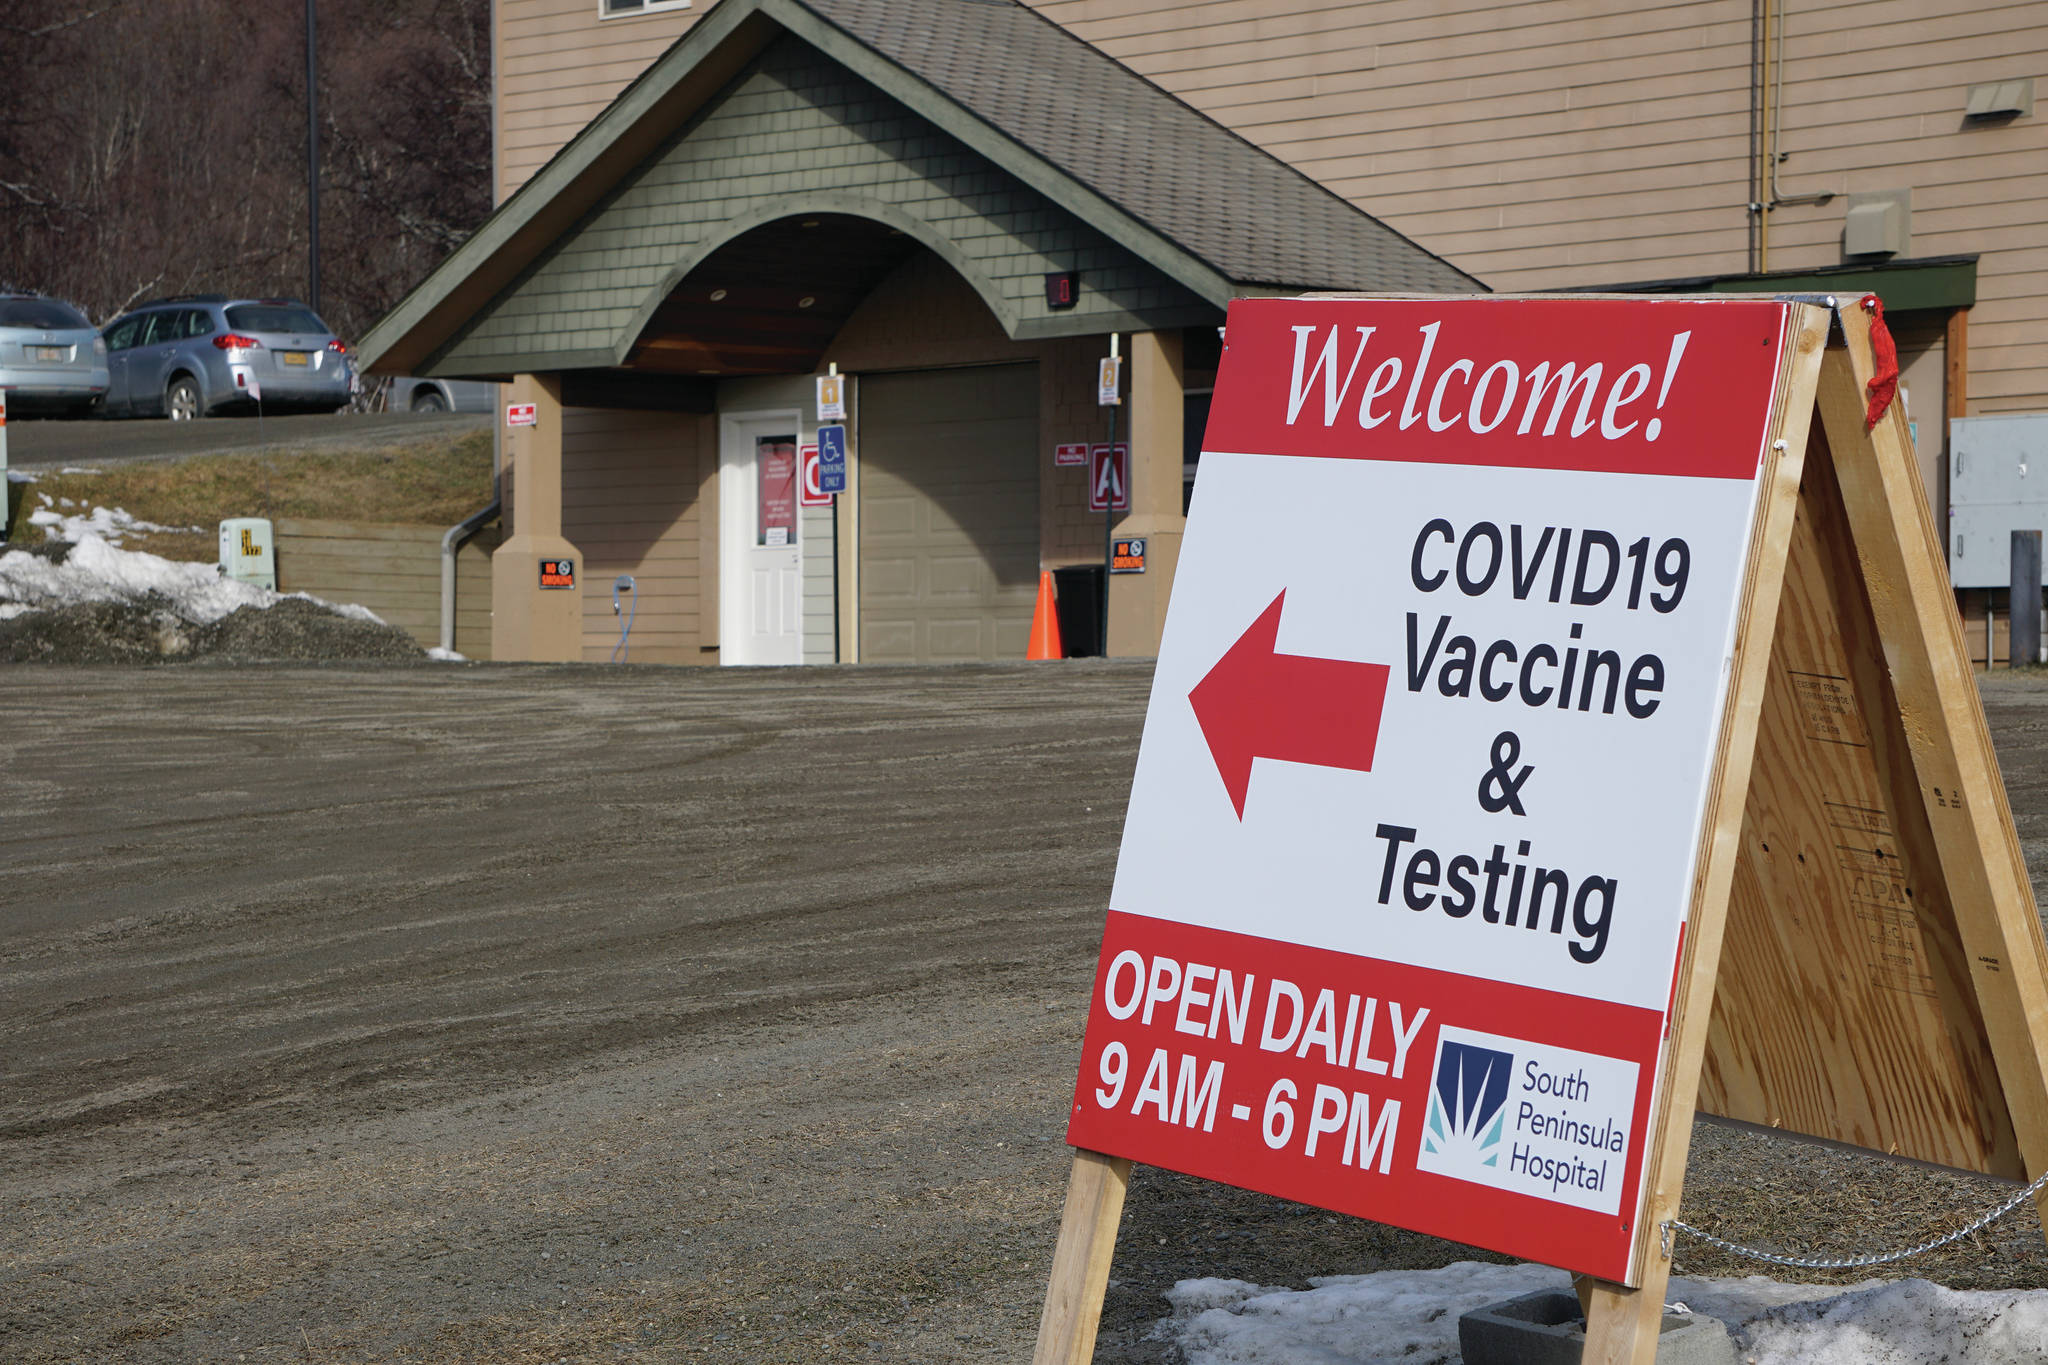 A sign on Friday, April 1, 2021, points the way to COVID-19 vaccines and testing at the South Peninsula Hospital testing and vaccine site on Bartlett Street in Homer, Alaska. (Photo by Michael Armstrong/Homer News)